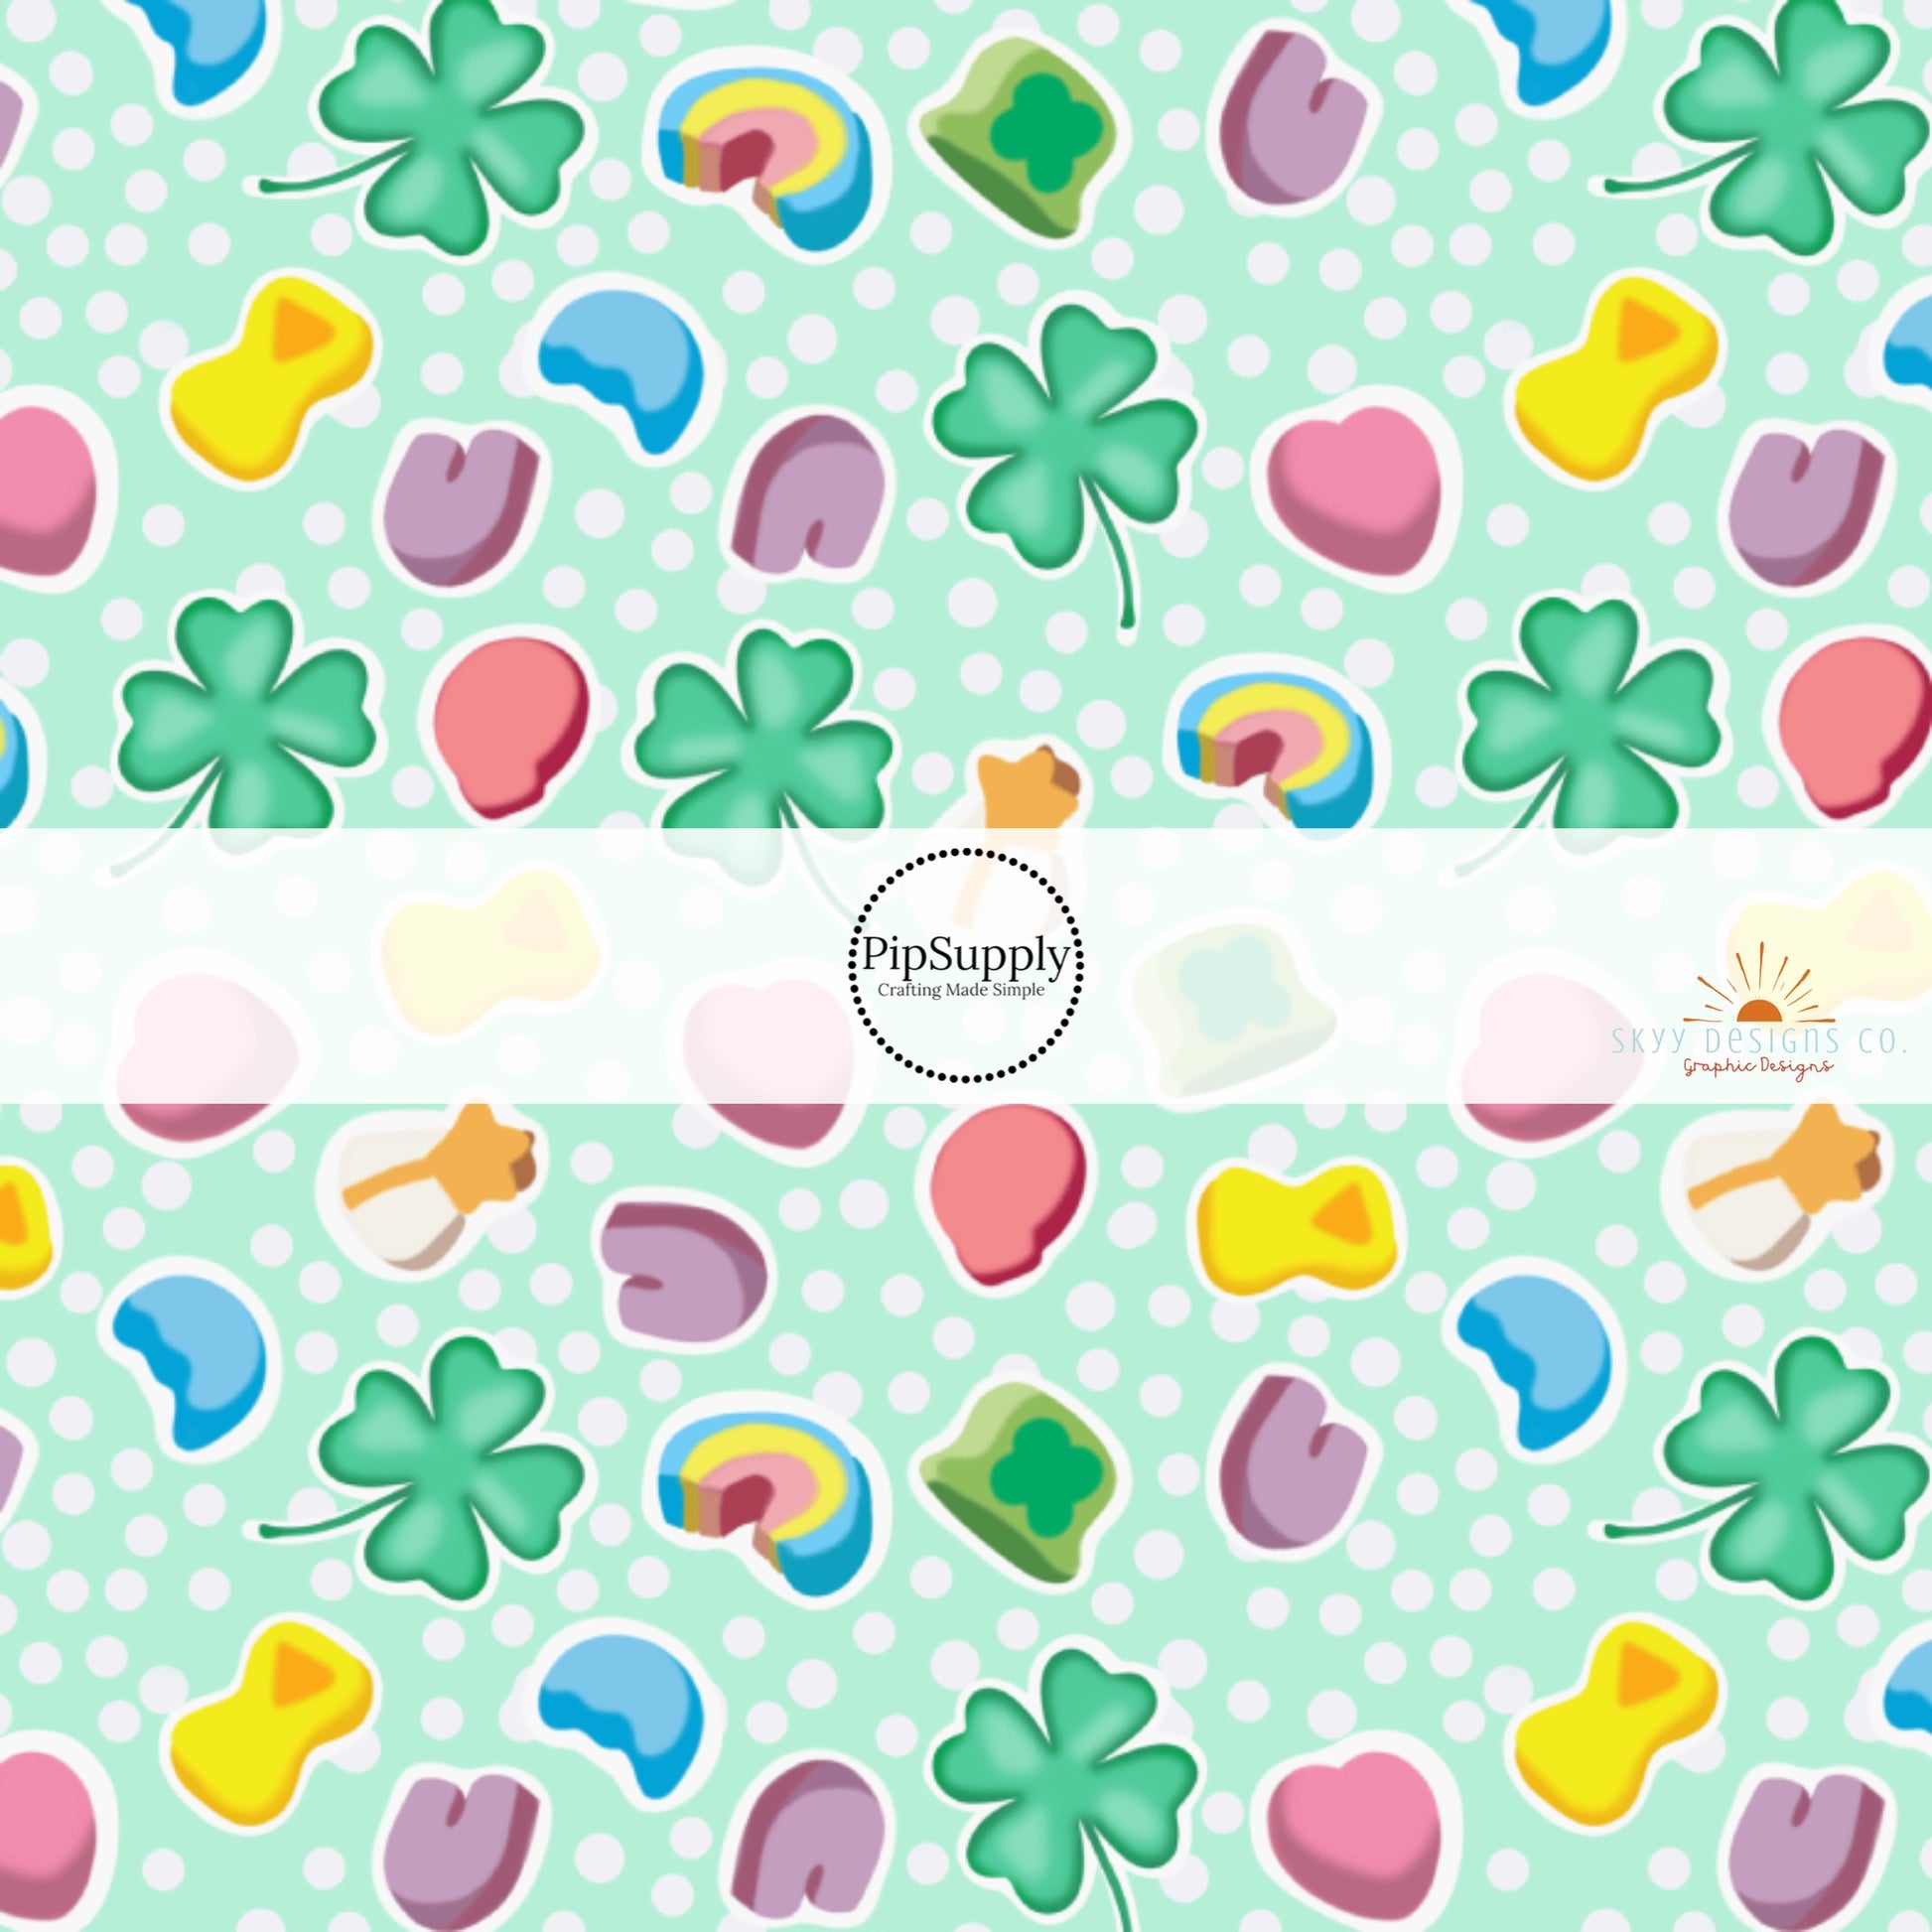 Green clovers, pink hearts, rainbows, and shooting star marshmallow charms on a polka dot green bow strip